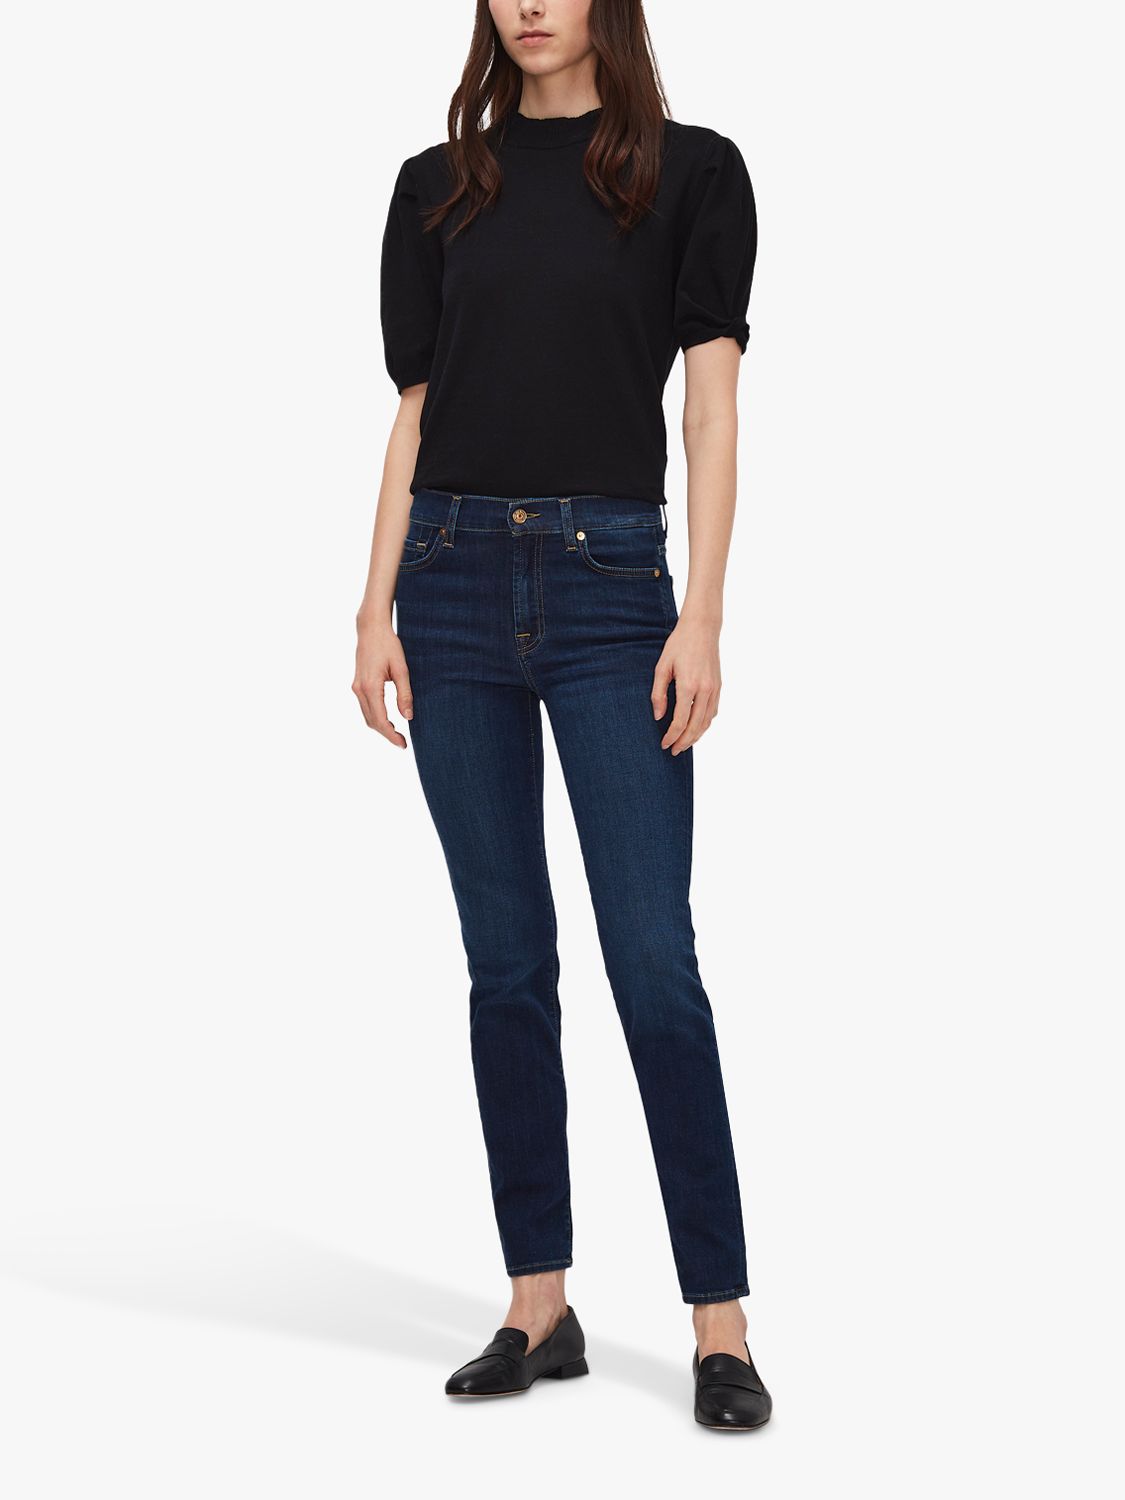 7 For All Mankind Roxanne B(Air) Jeans, Rinsed Indigo, 24